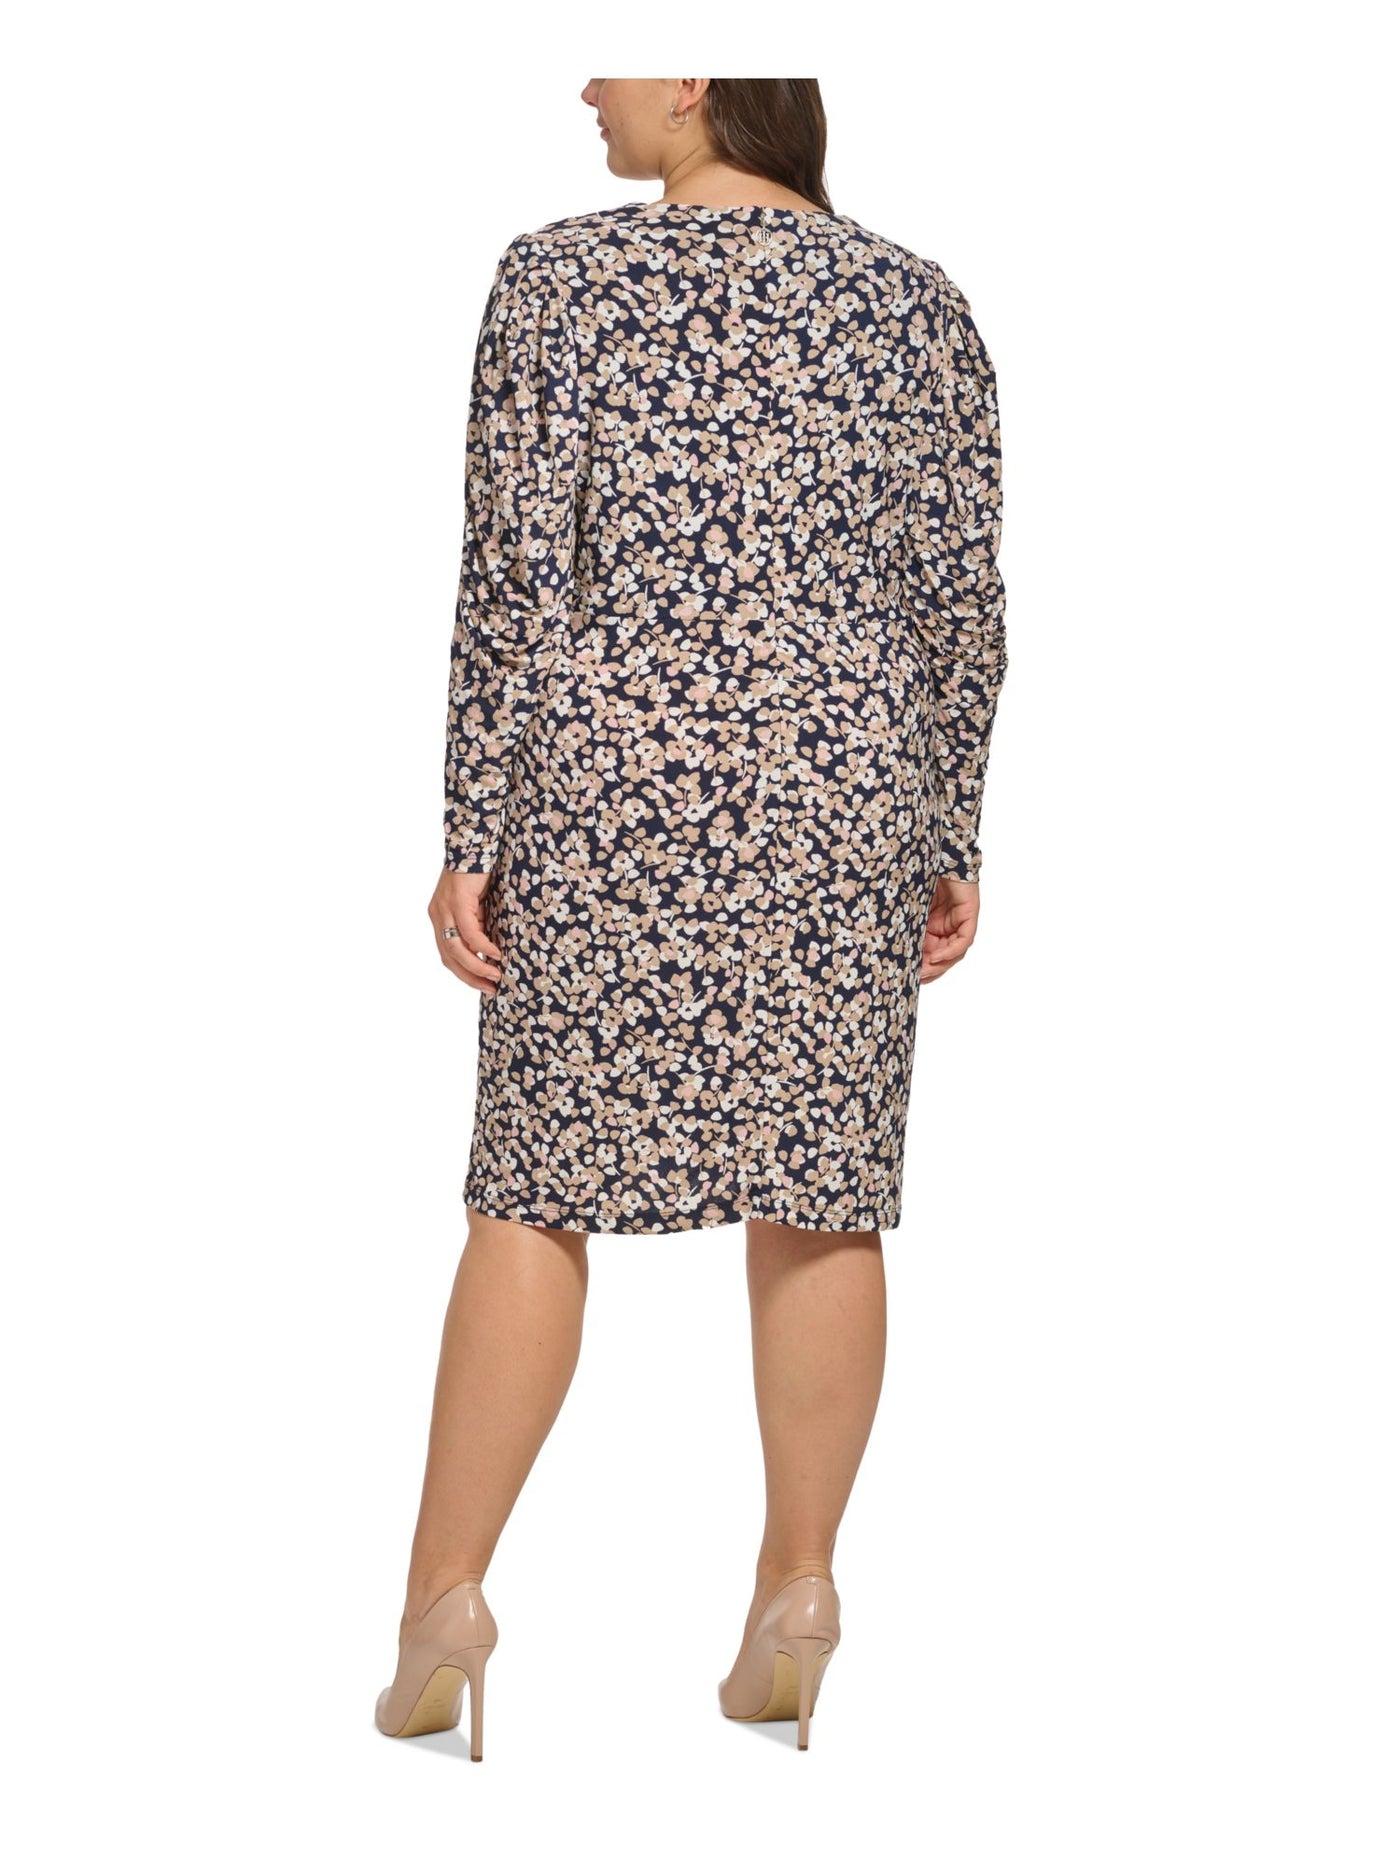 TOMMY HILFIGER Womens Navy Zippered Wrap Look Floral Long Sleeve Surplice Neckline Knee Length Fit + Flare Dress Plus 18W